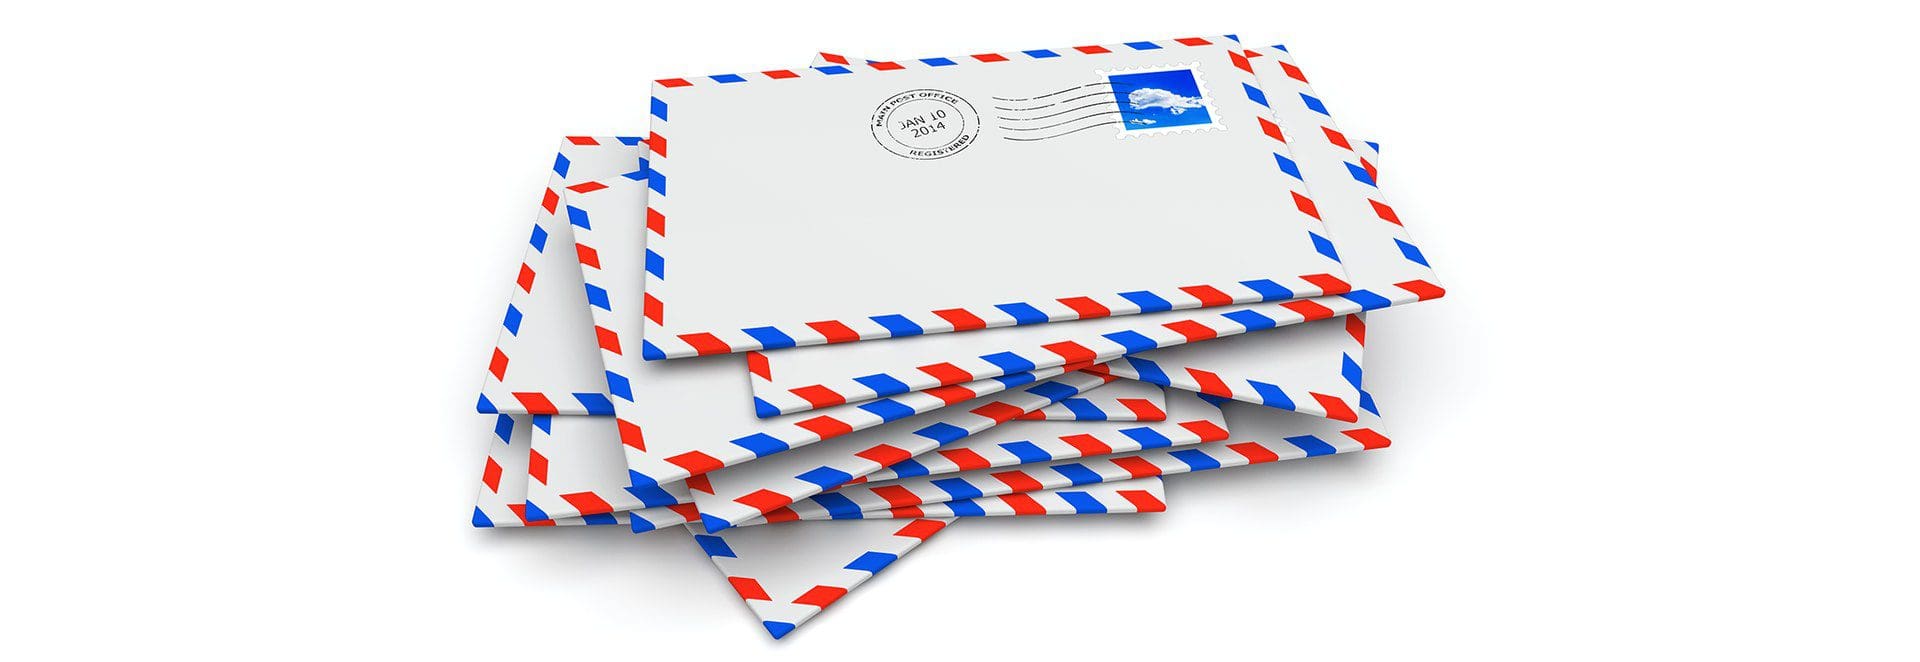 A stack of red, white and blue envelopes.